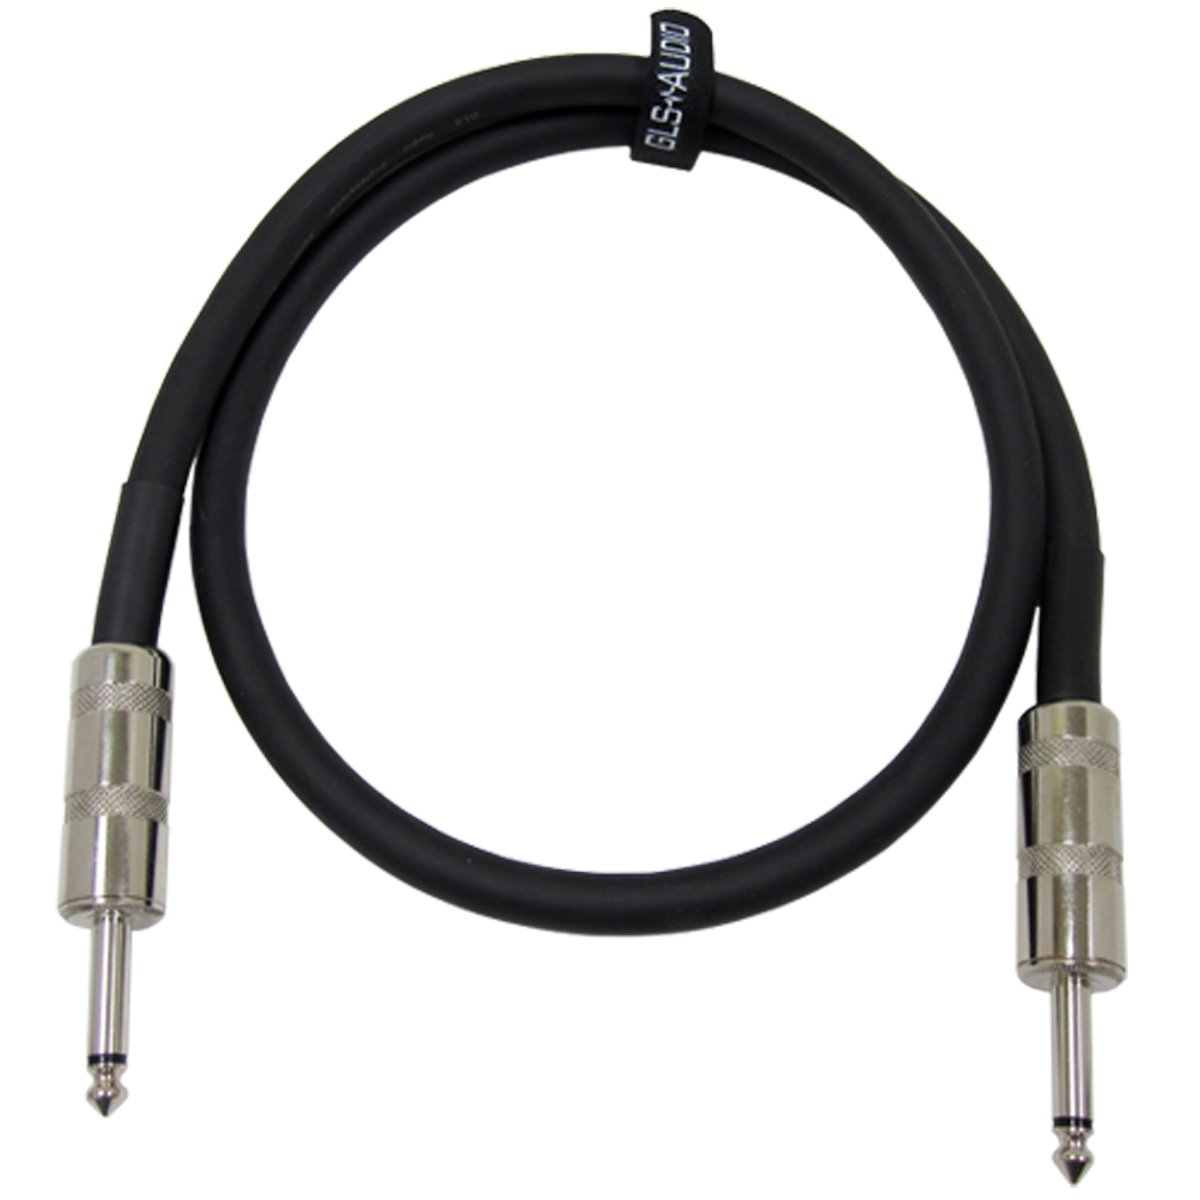 guitar speaker cable review